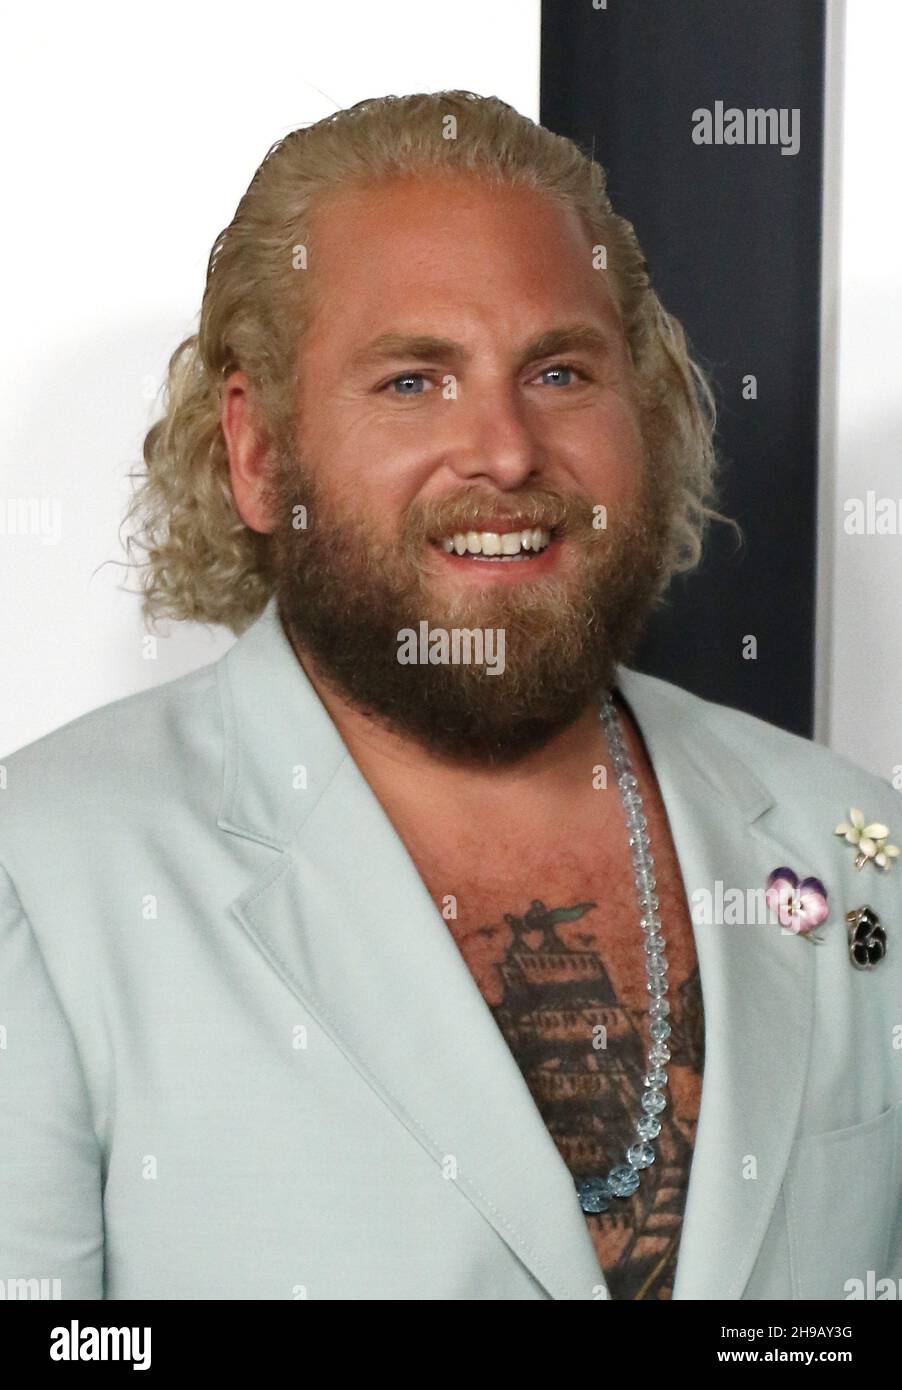 New York, NY, USA. 5th Dec, 2021. Jonah Hill at the Netflix World Premiere Of Don't Look Up at Jazz At Lincoln Center in New York City on December 5, 2021. Credit: Rw/Media Punch/Alamy Live News Stock Photo